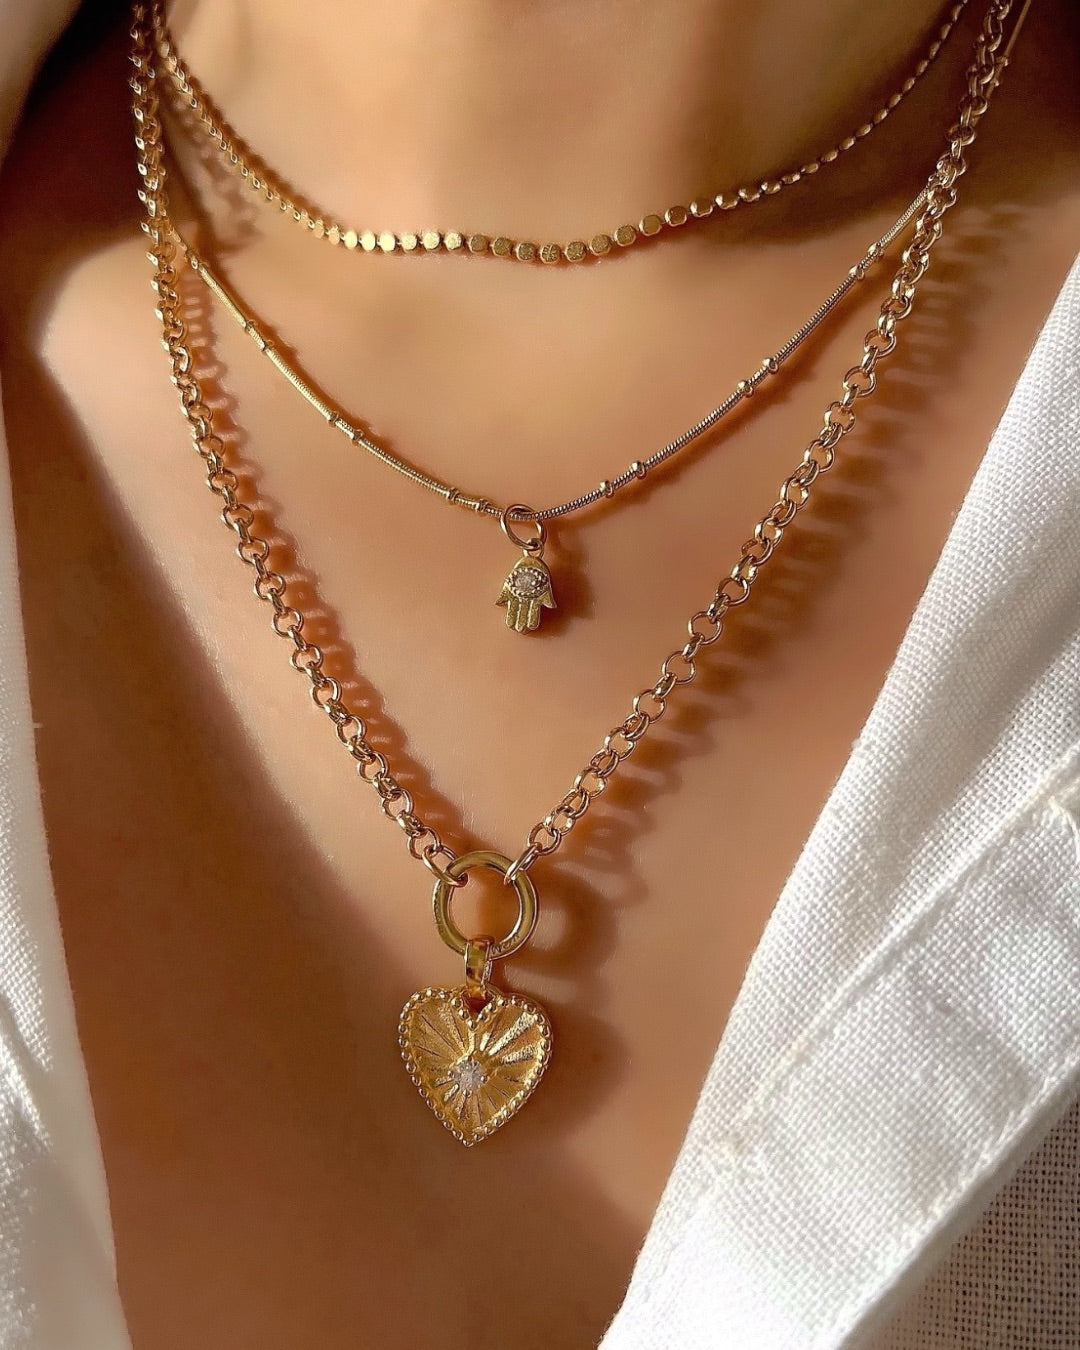 14k Gold fill Rolo annex link clasp necklace with heart token pendant on a model 